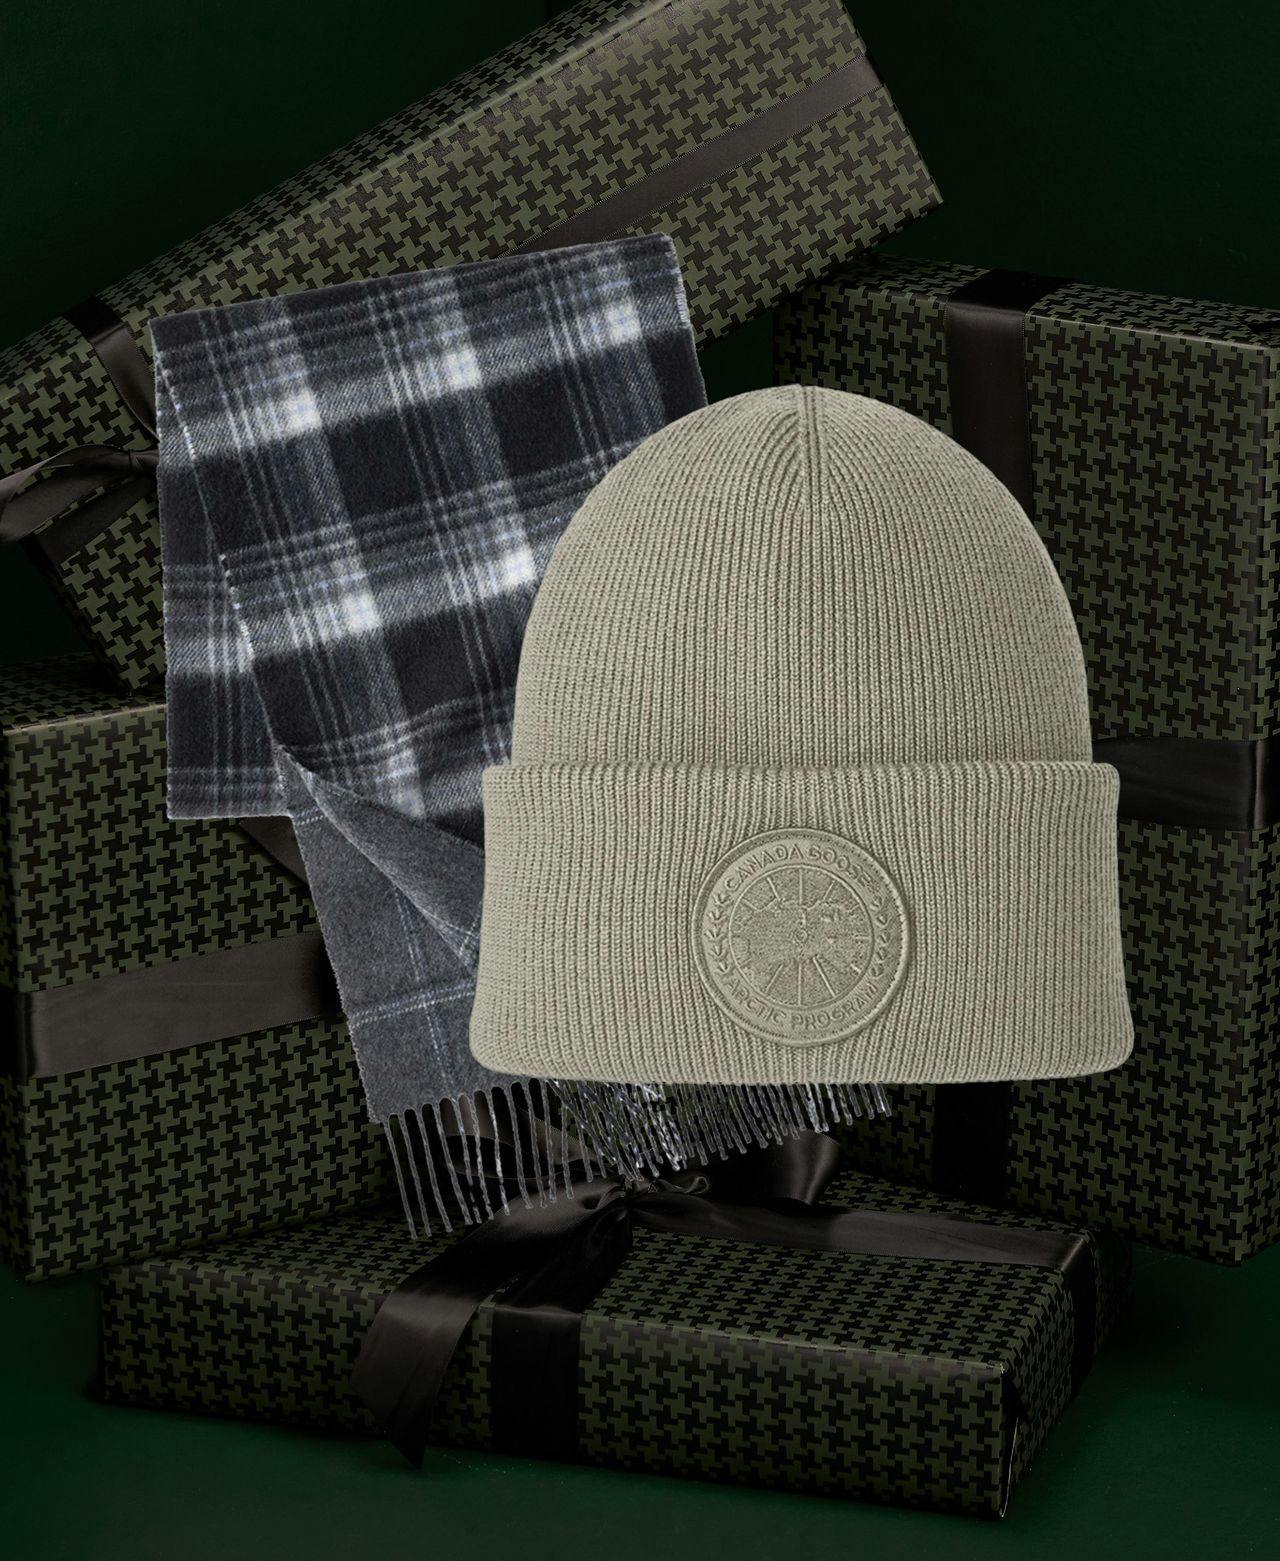 Canada Goose Beige Merino Wool Toque & checkered scarf on dark green gift boxes backdrop